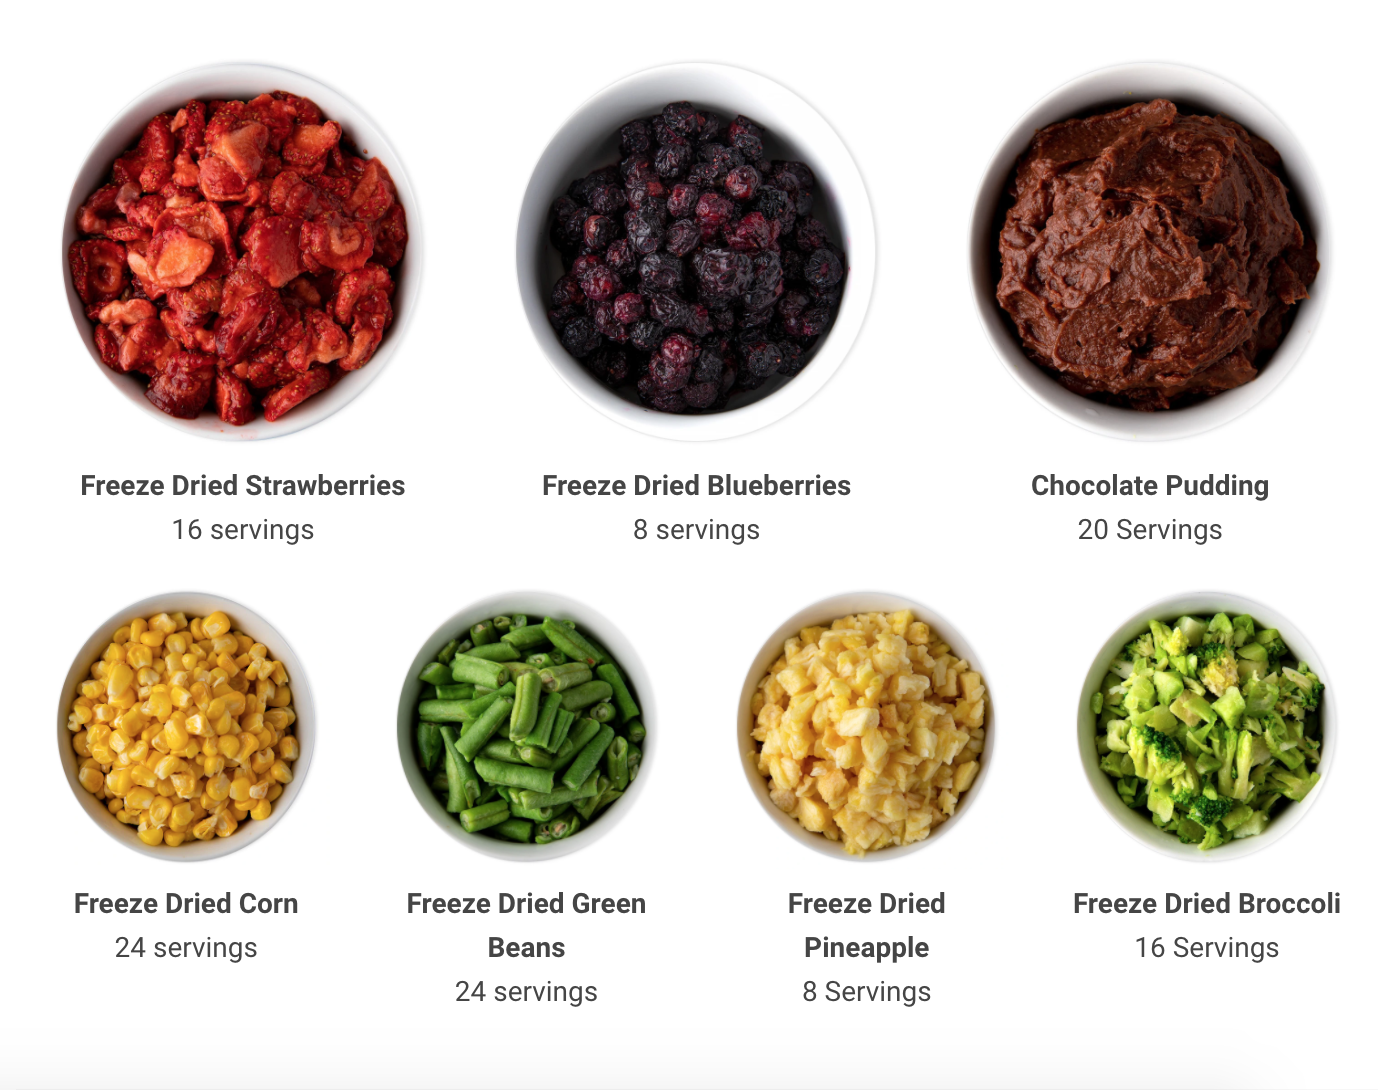 Freeze Dried Strawberries 16 servings, Freeze Dried Blueberries 8 servings, Chocolate Pudding 20 Servings, Freeze Dried Corn 24 servings, Freeze Dried Green Beans 24 servings, Freeze Dried Pineapple 8 Servings, Freeze Dried Broccoli 16 Servings